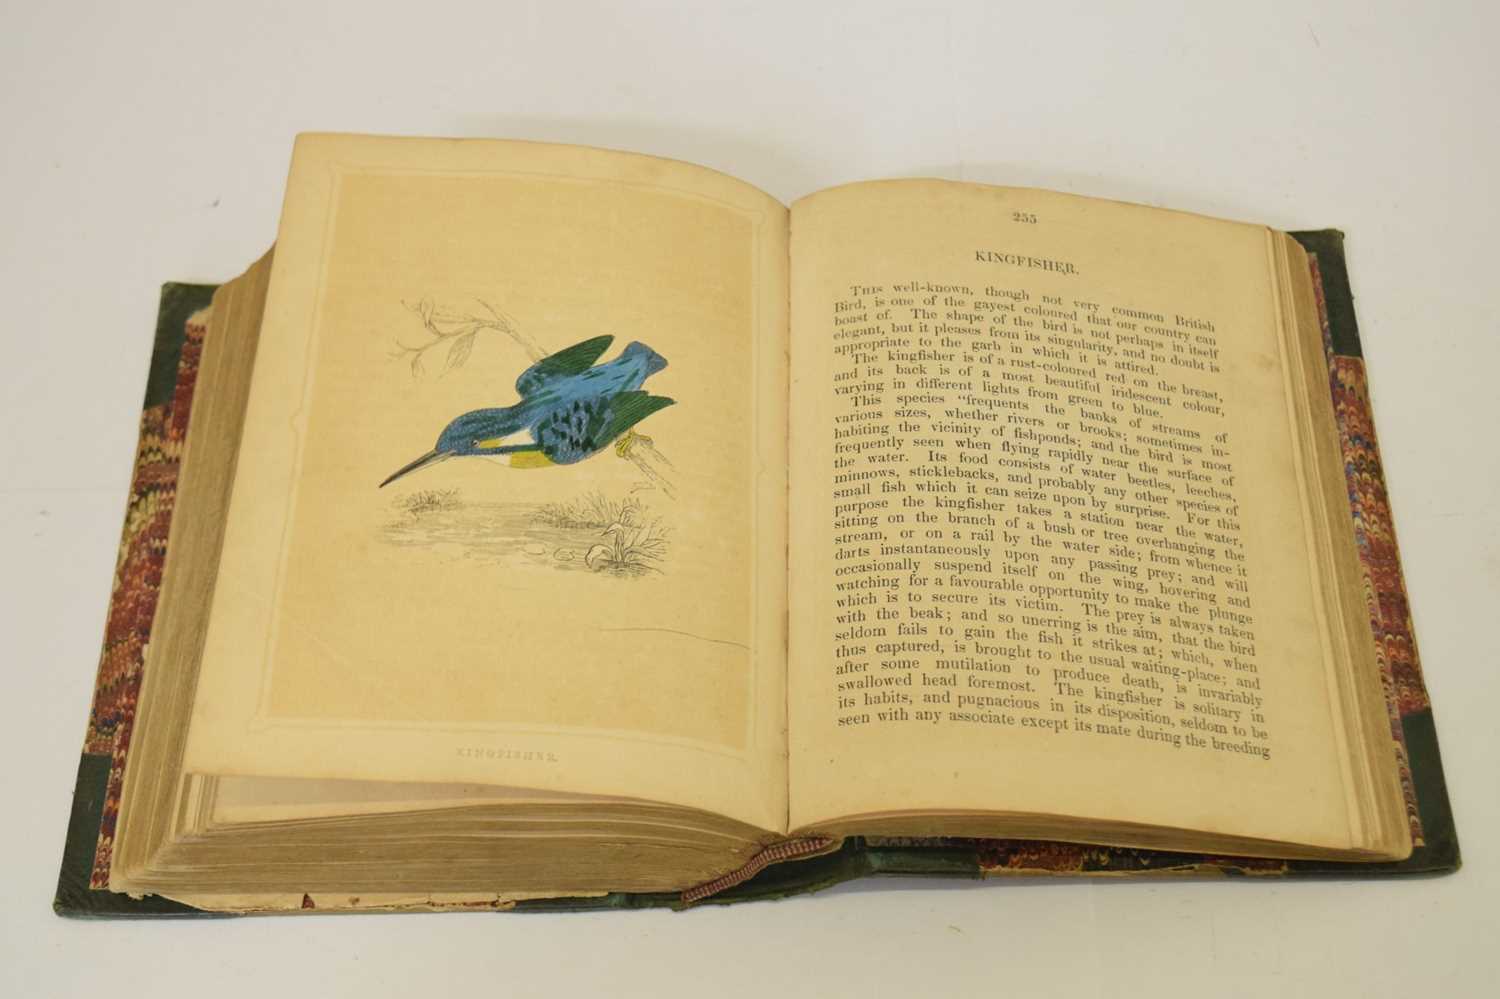 Rev F. O. Morris, B.A., 'Book of Natural History' - First edition 1852 - Image 7 of 7